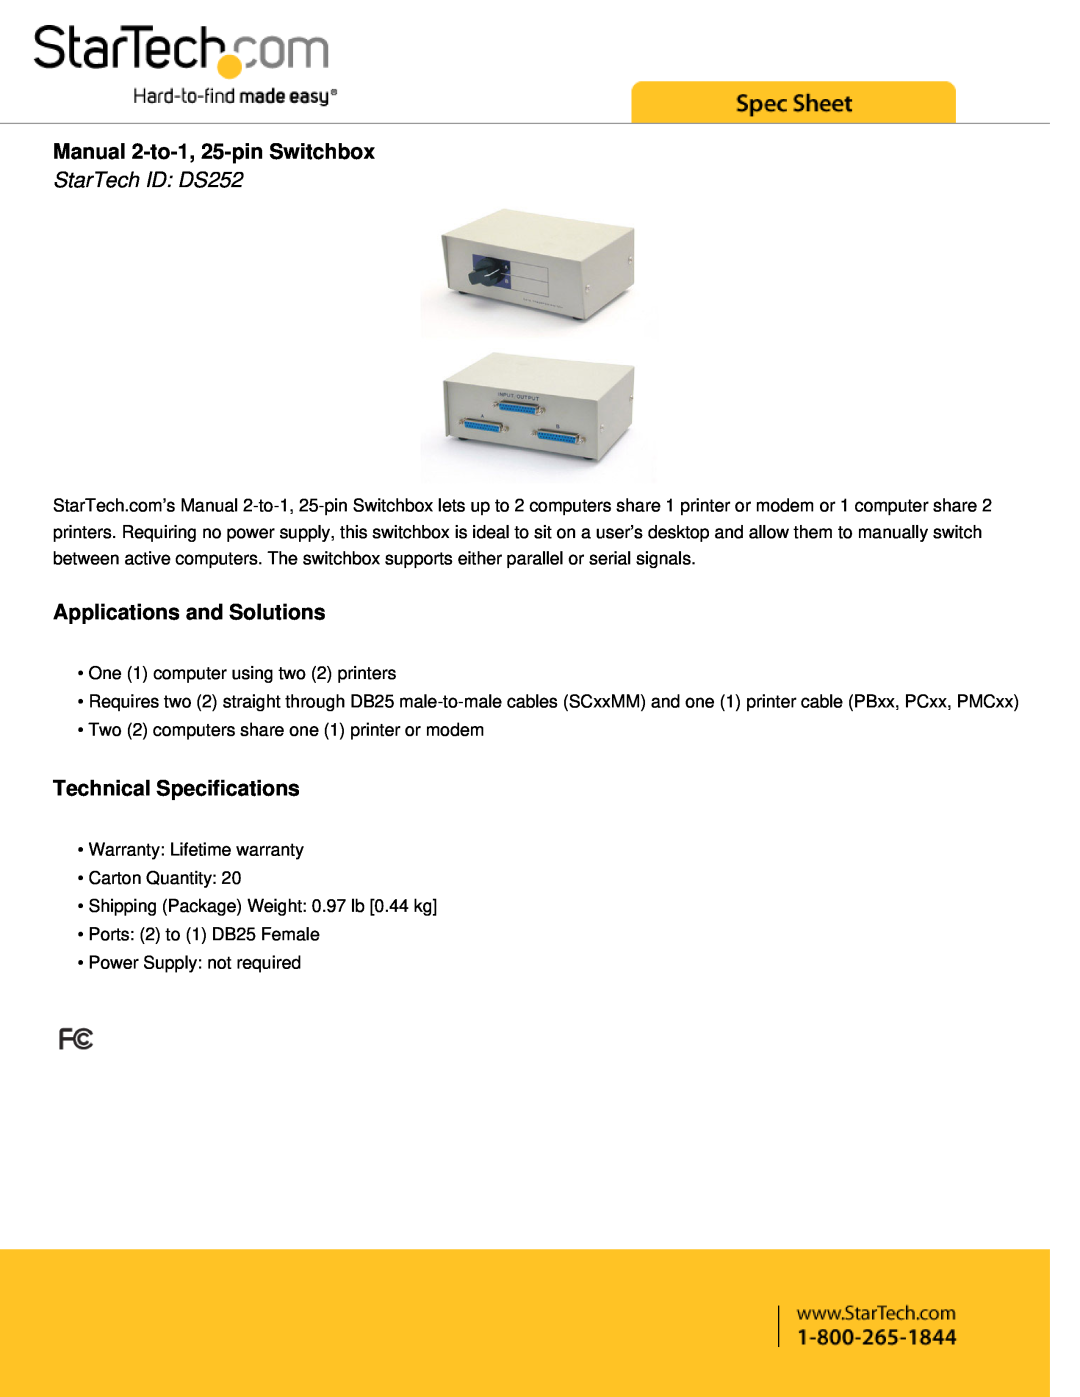 StarTech.com technical specifications Manual 2-to-1, 25-pin Switchbox, StarTech ID DS252, Applications and Solutions 